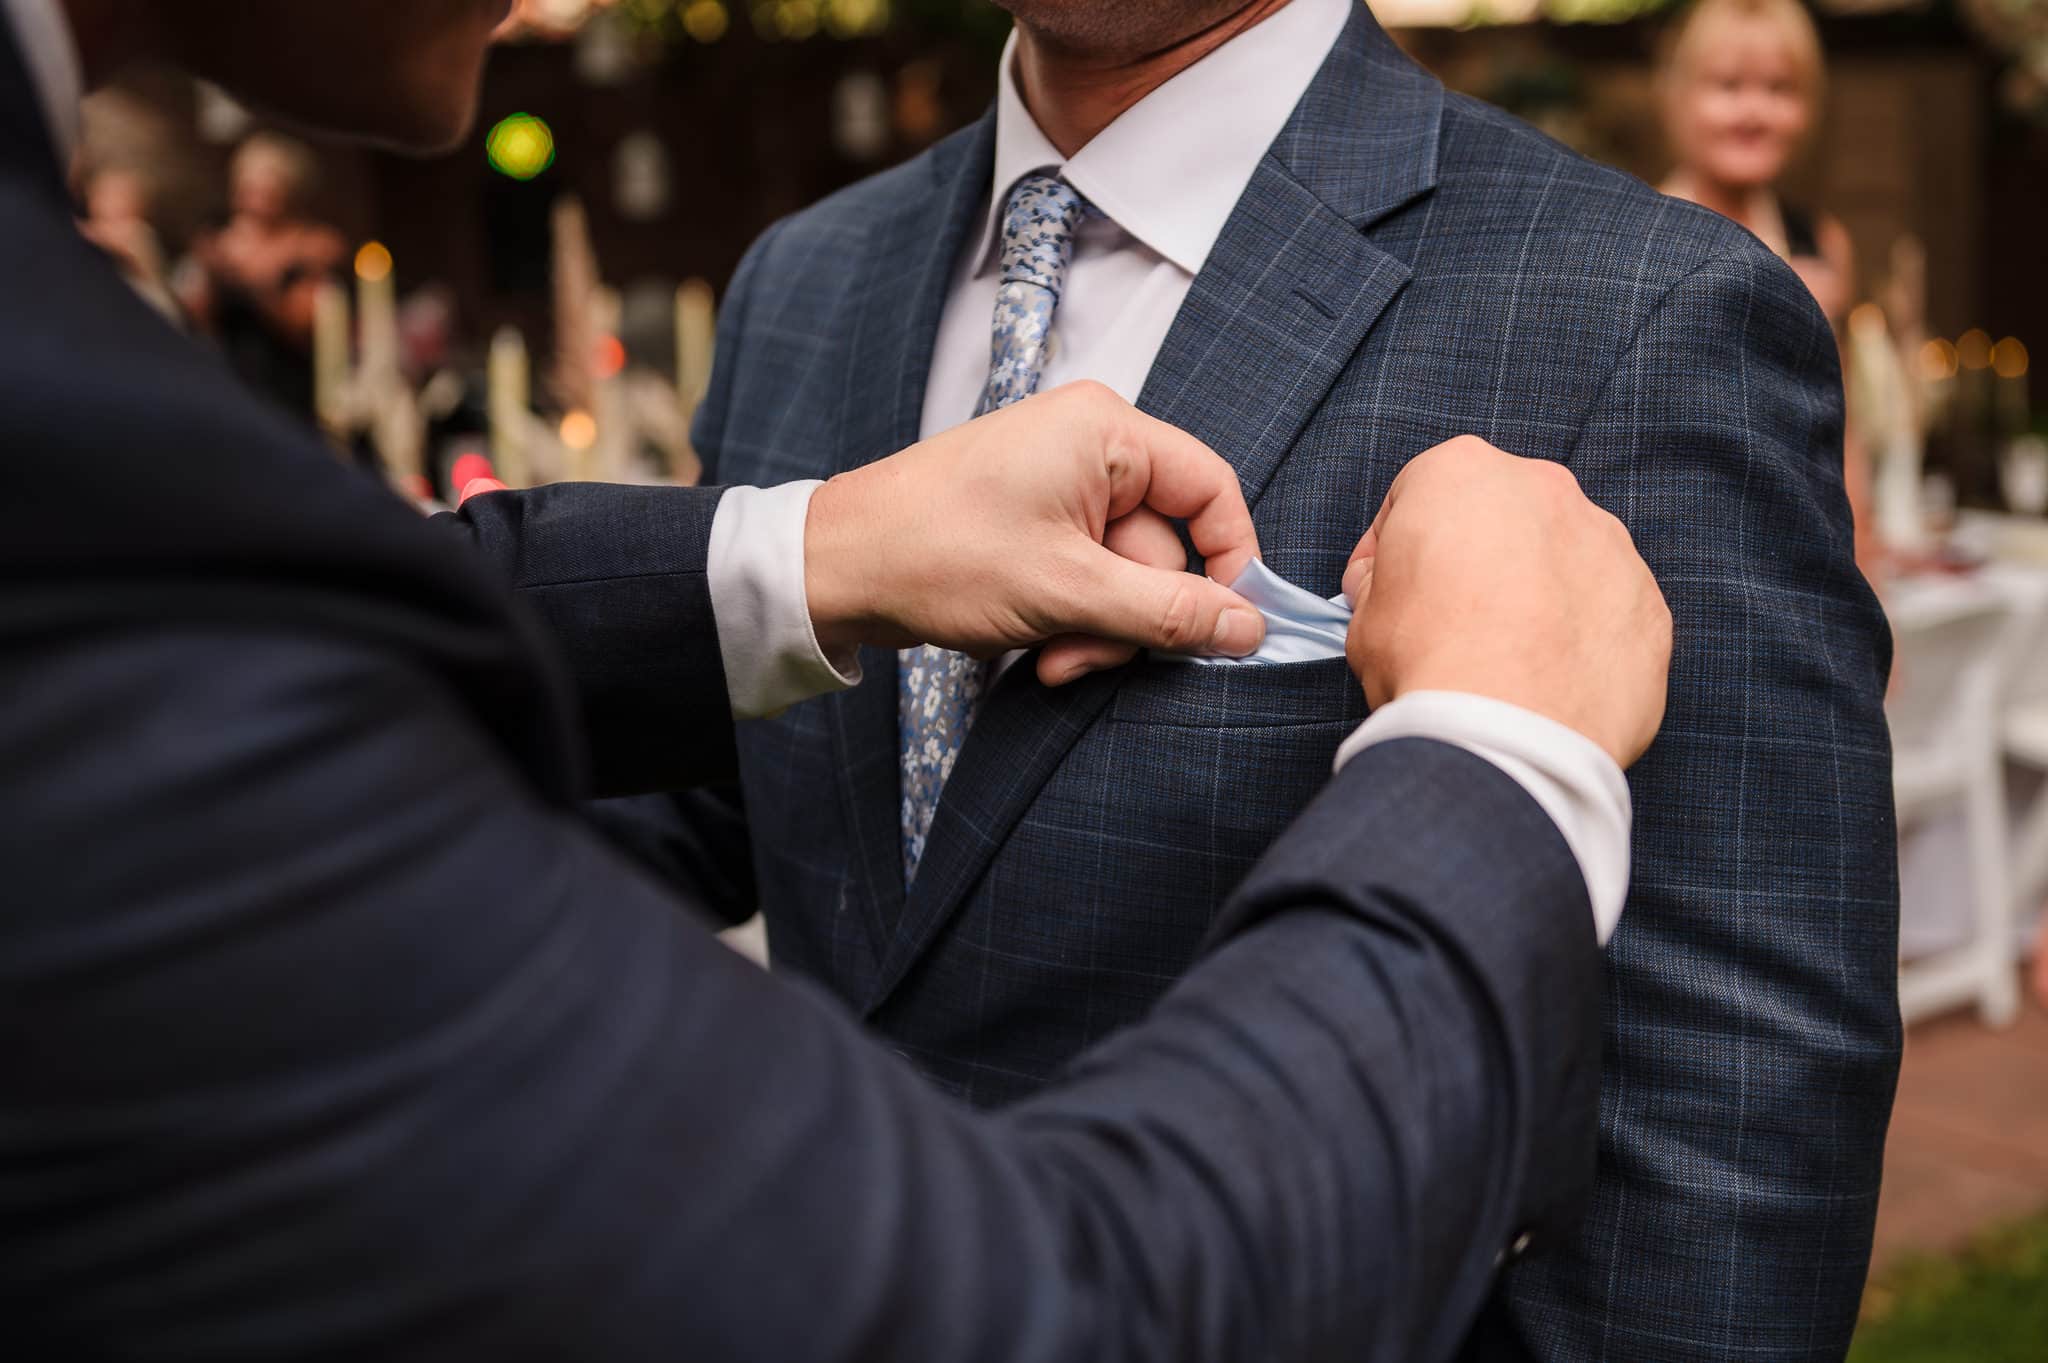 Close up of a hands adjusting the pocket square in the suit of a groom.